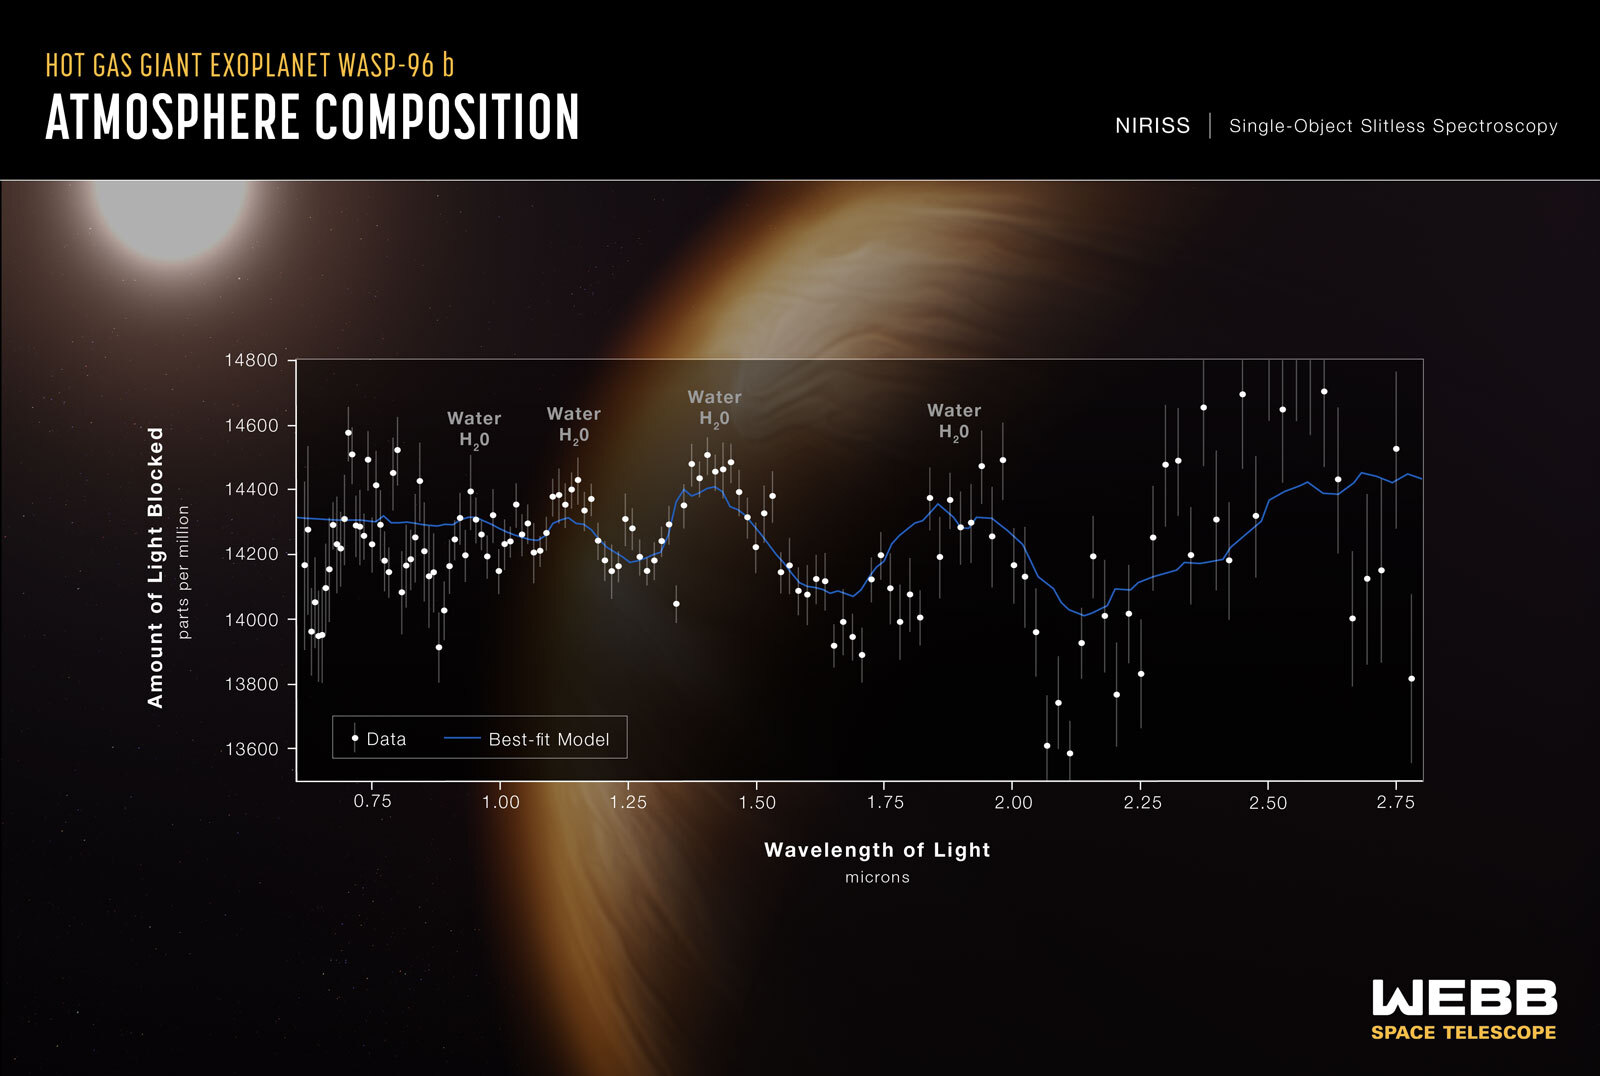 Graphic showing atmospheric component spectrum of a distant gas giant.